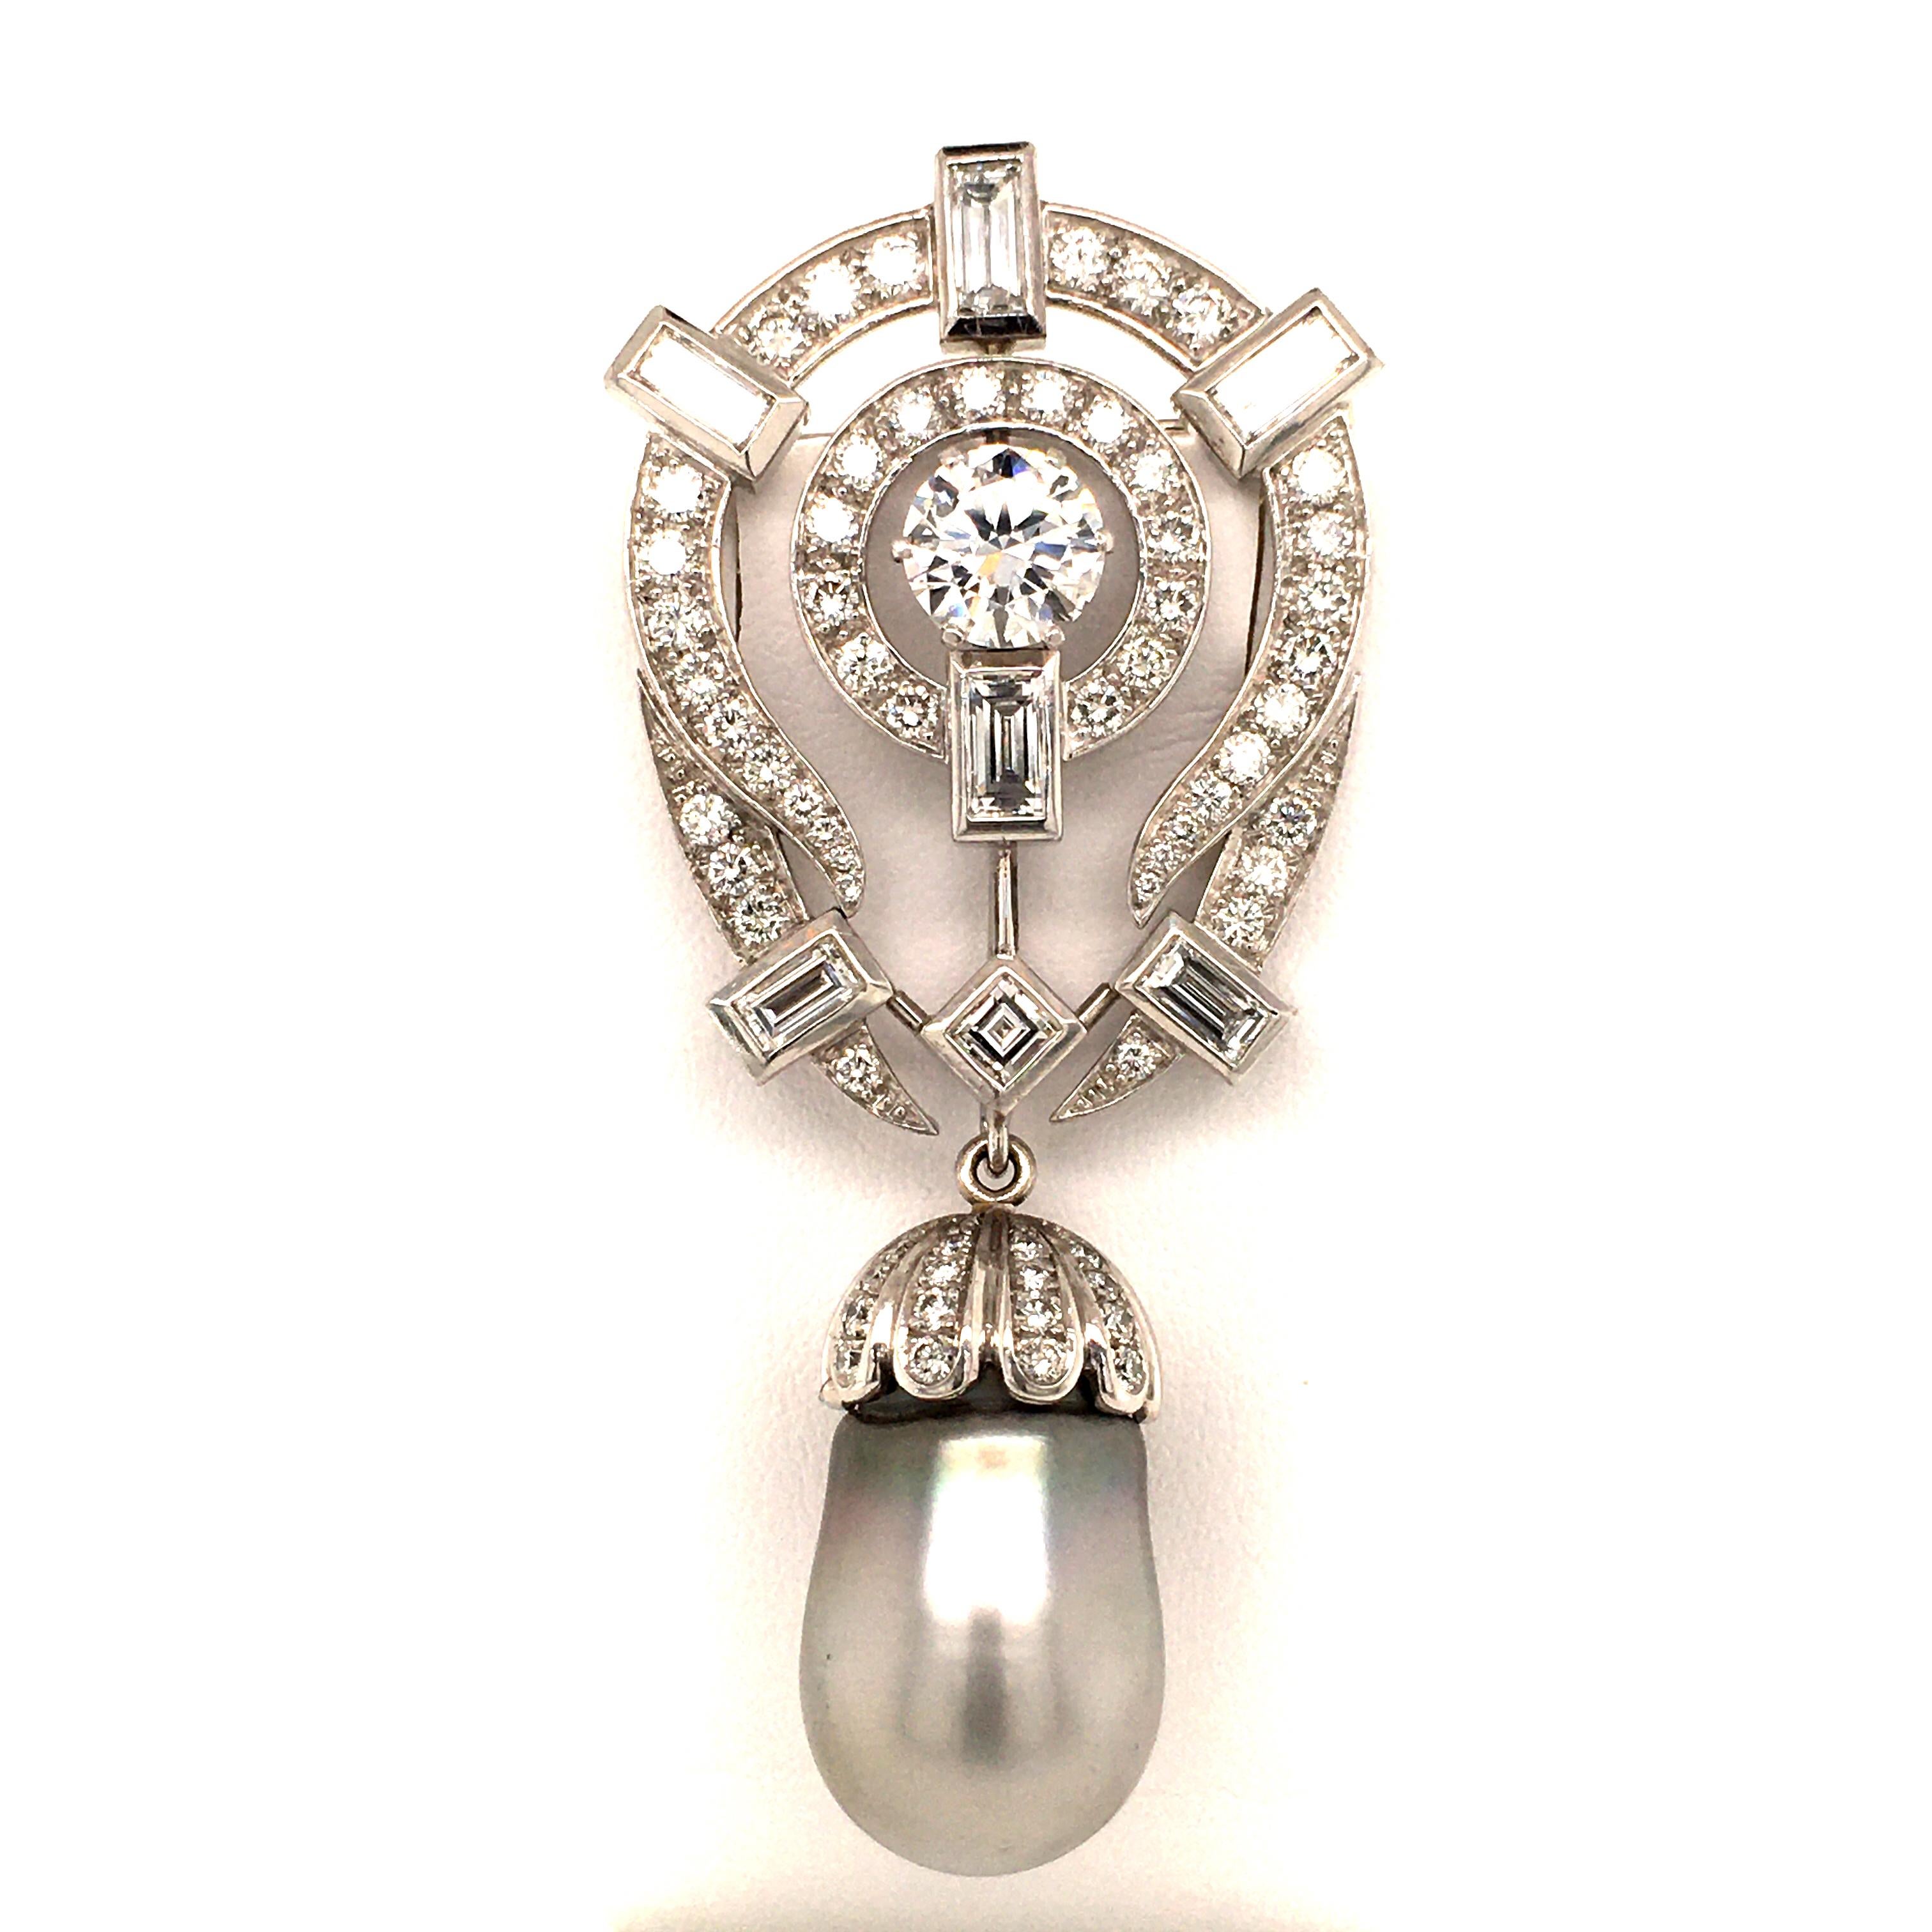 This flamboyant pendant brooch features a Tahitian cultured pearl drop of 21.5 by 14 mm. The main body of the brooch is set with a brilliant cut diamond of 1.60 carats, F/G color and vs1 clarity. Accented with 64 brilliant cut diamonds of G/H color